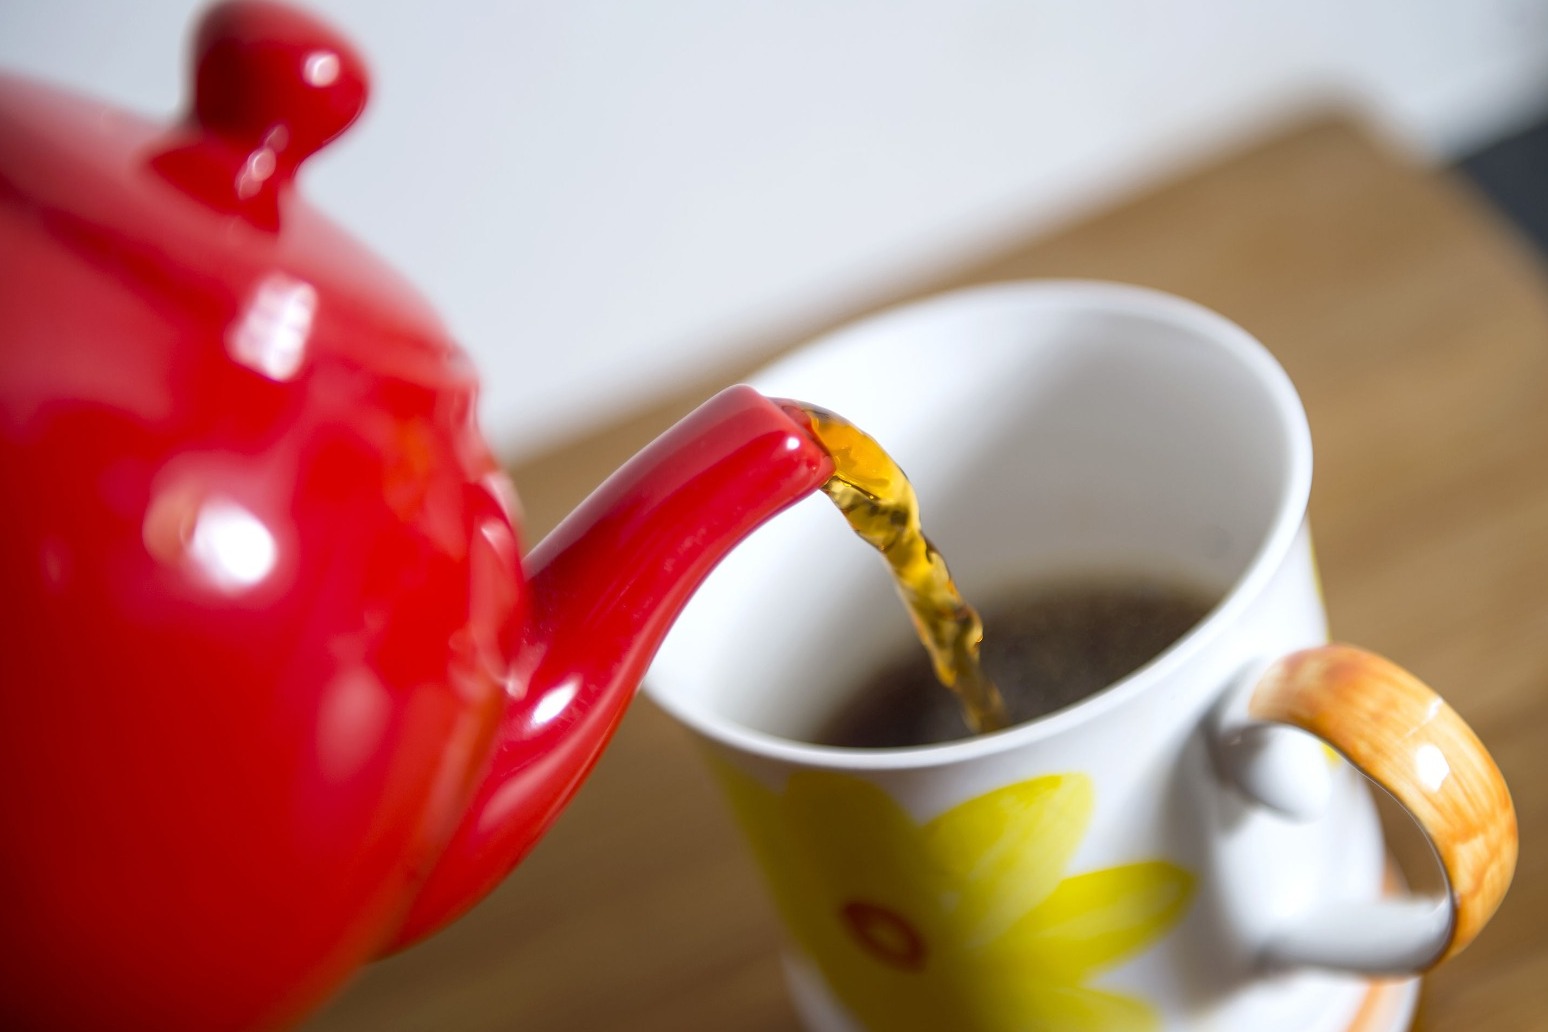 Tea associated with a lower risk of mortality, research suggests 